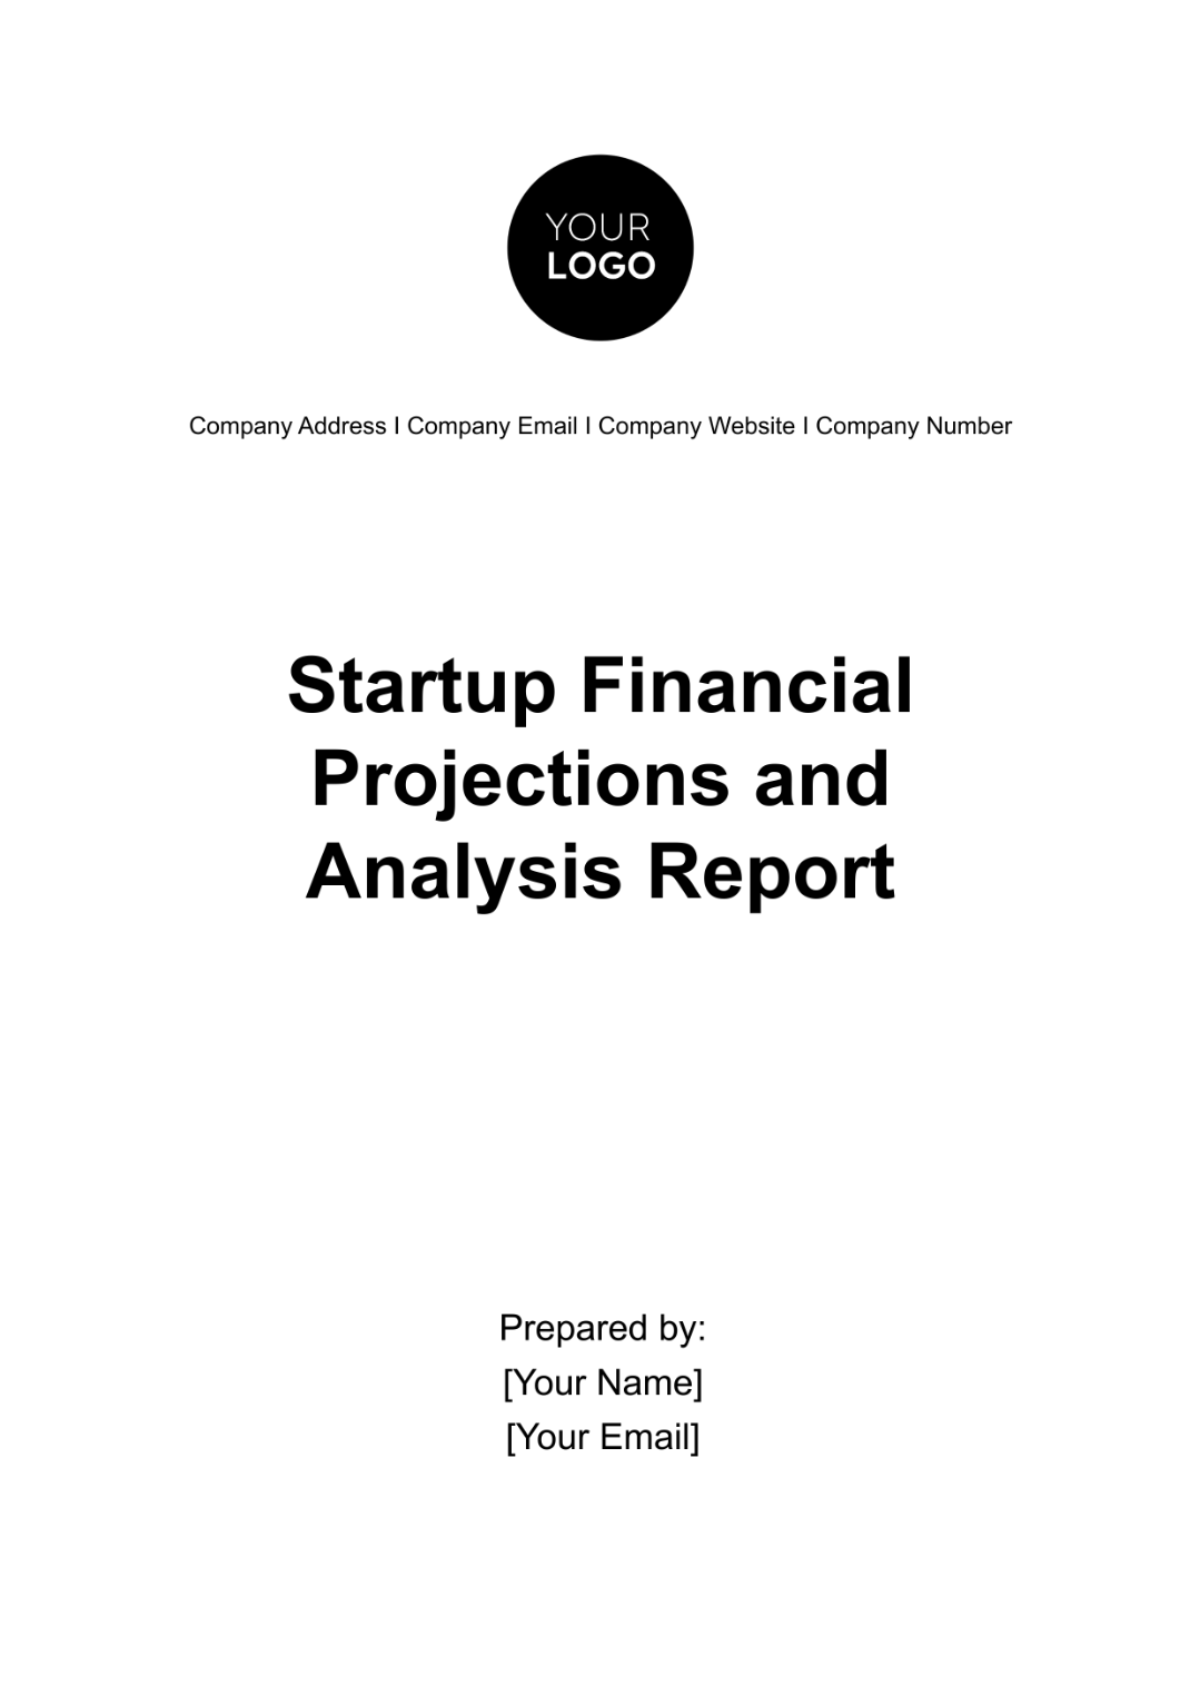 Free Startup Financial Projections and Analysis Report Template